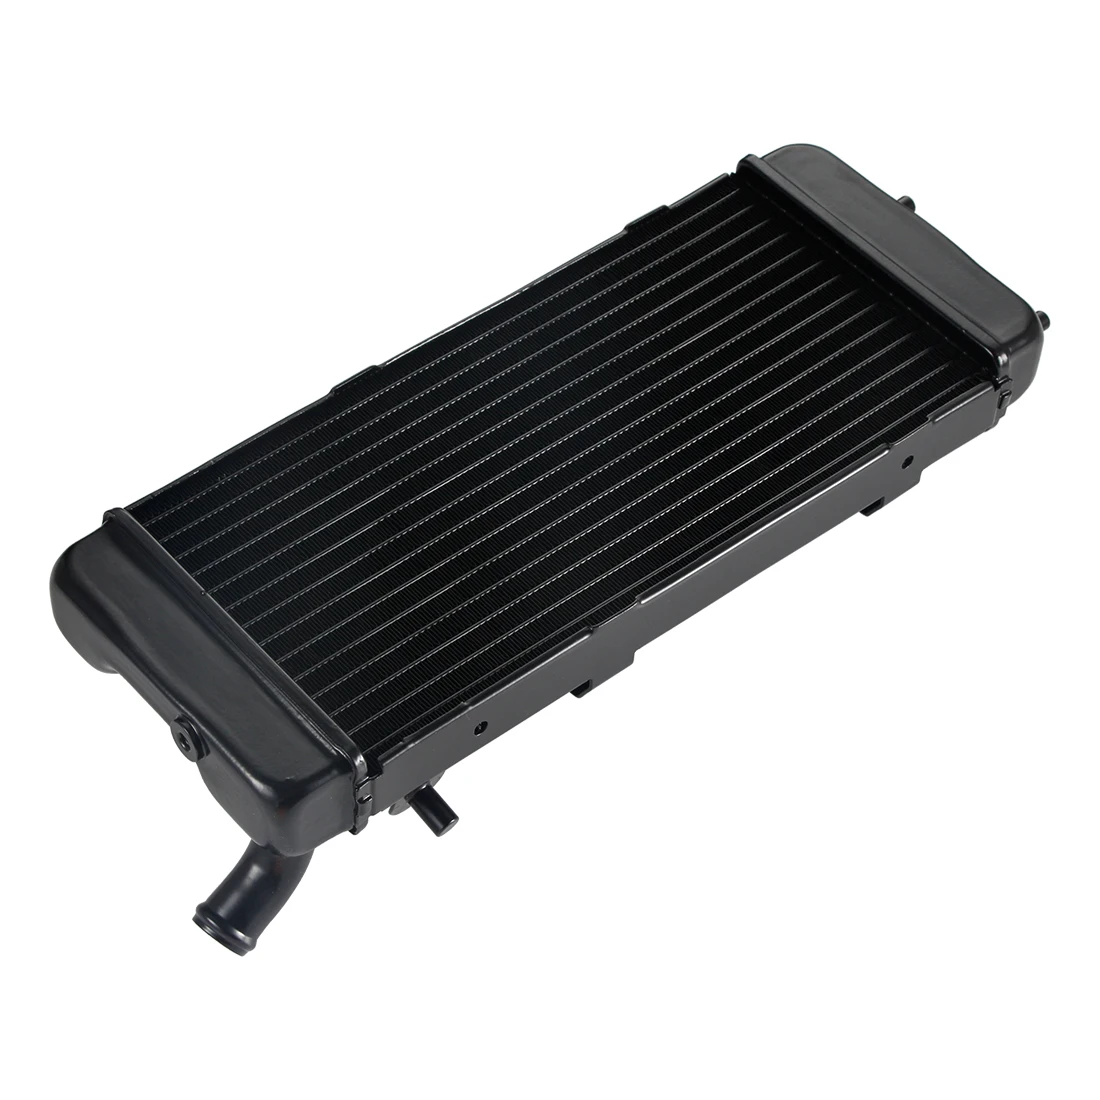 Motorcycle Accessories Engine Aluminum Cooling Coolant Radiator For HONDA VLX600 Steed 600 1990 - 1996 1991 1992 1993 1994 1995